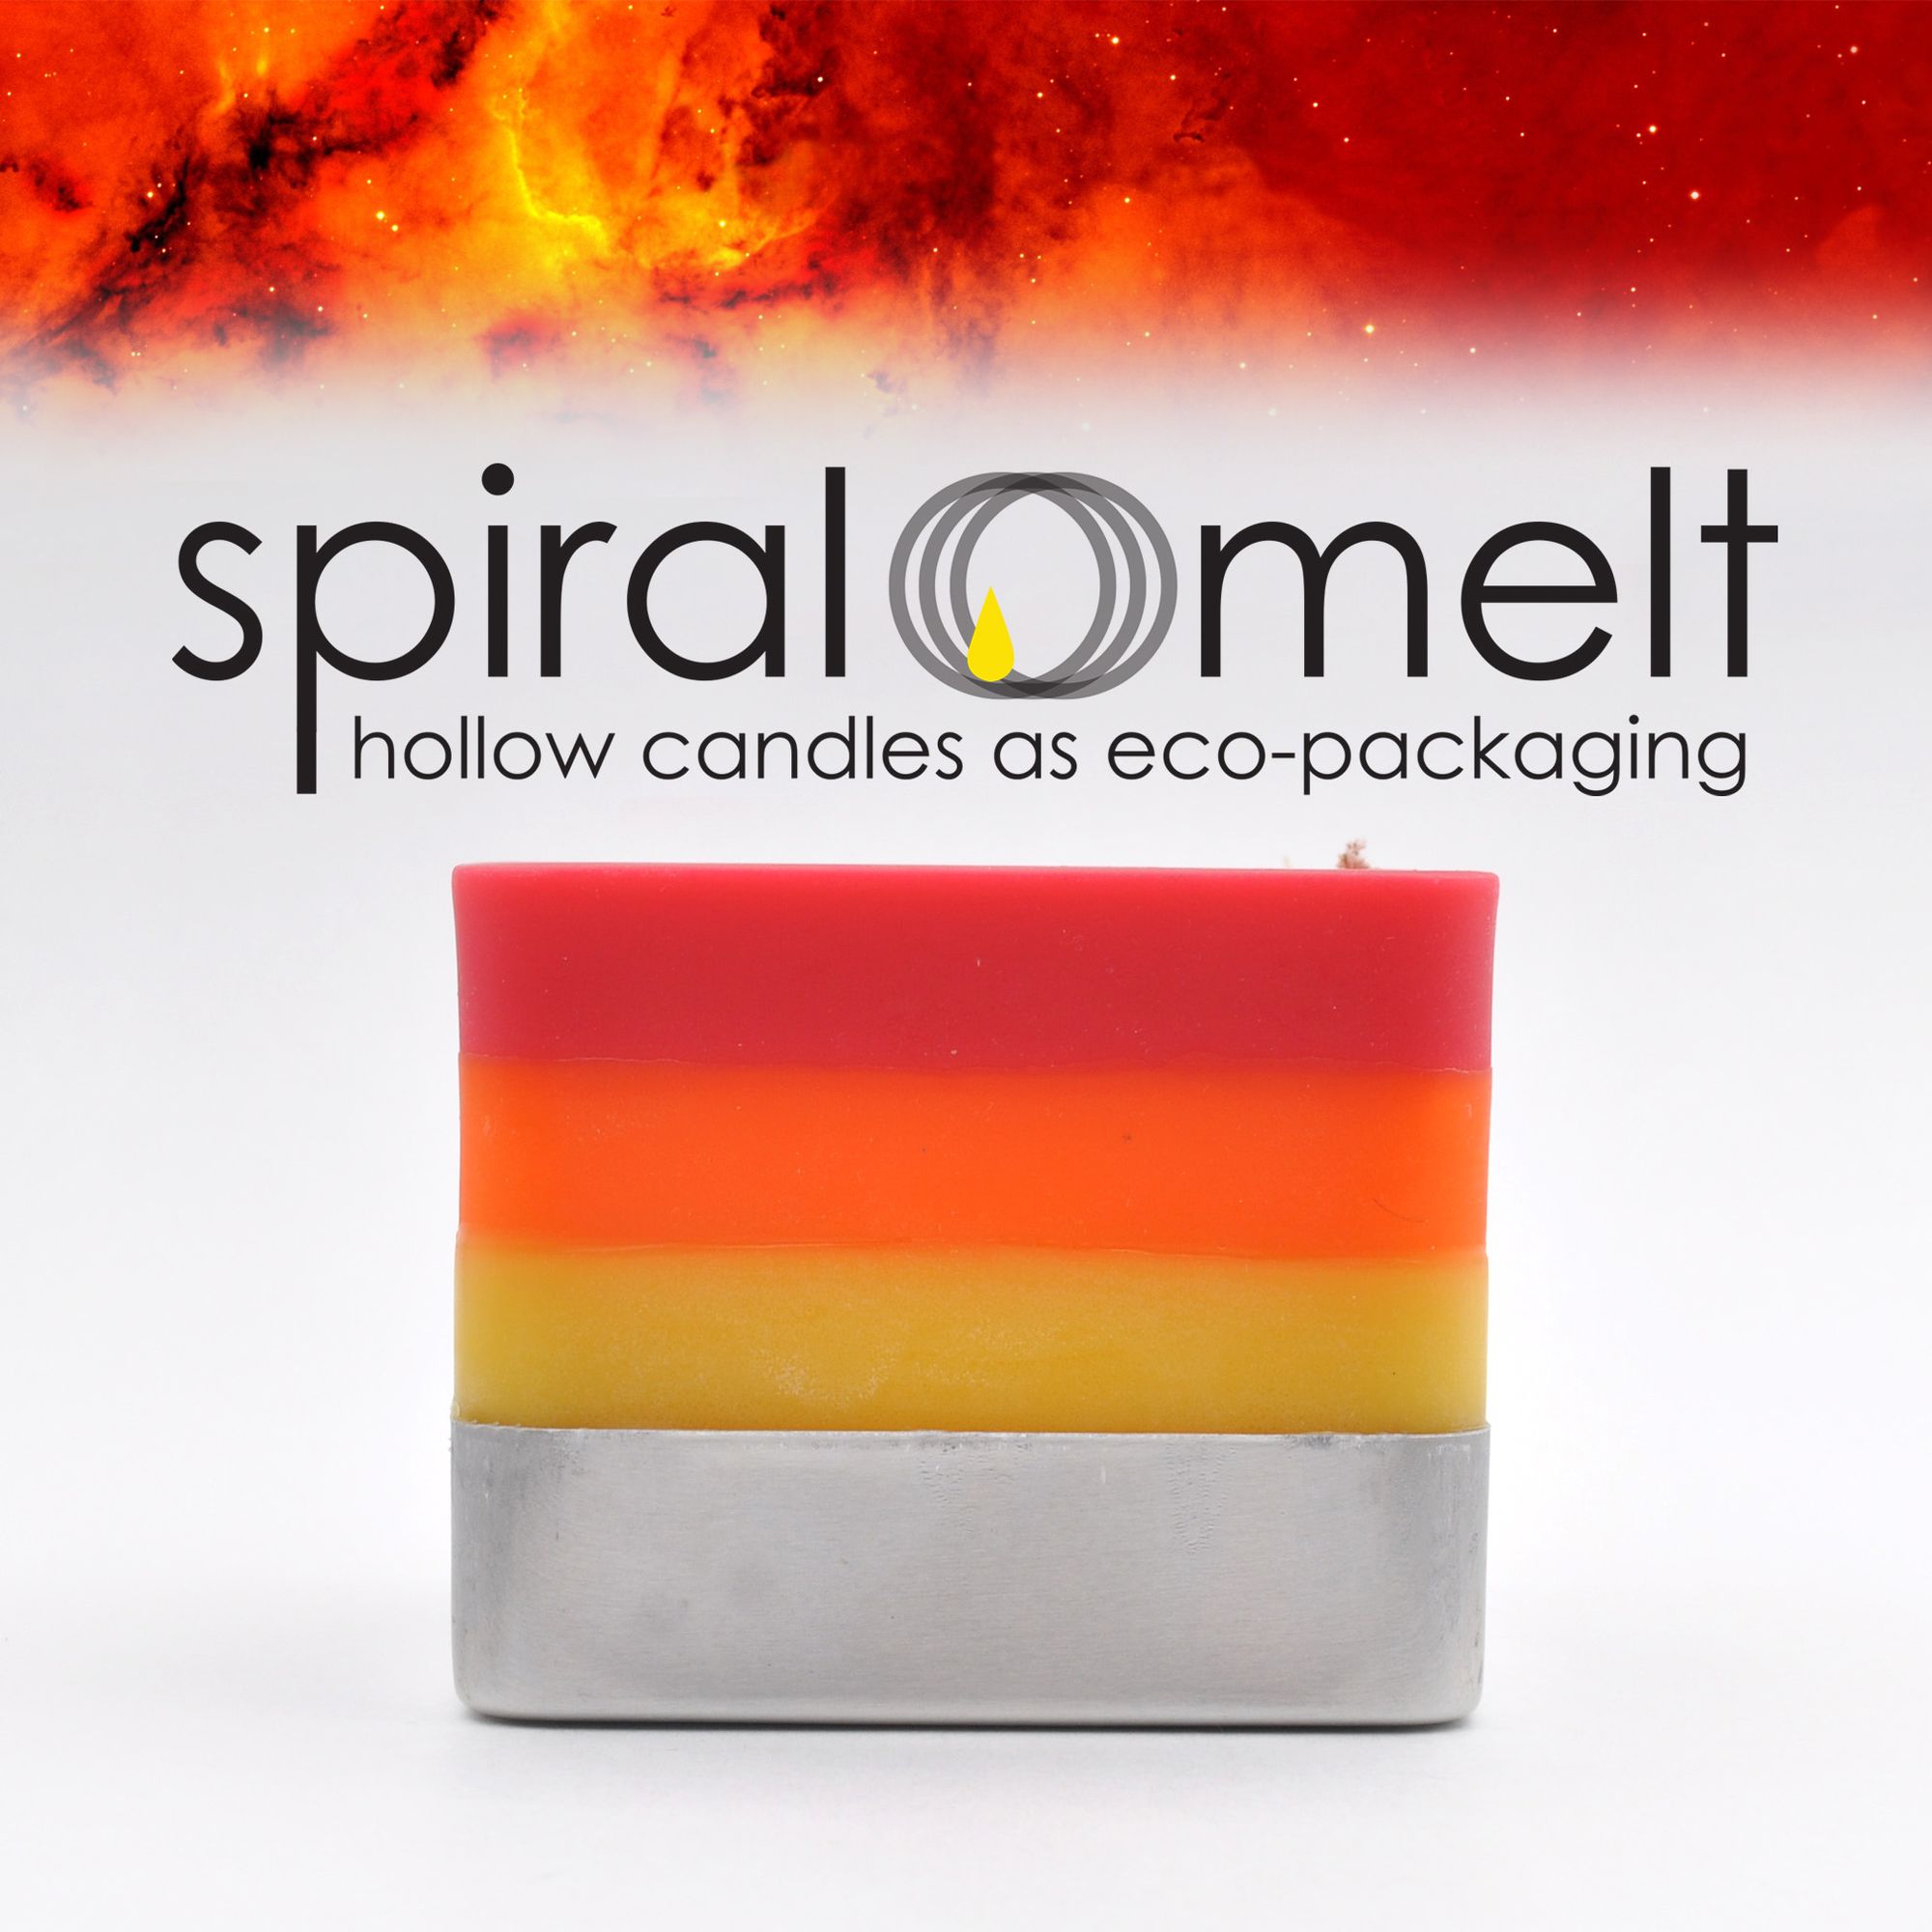 The Most Amazing Spiral Candle - Spiral Melt